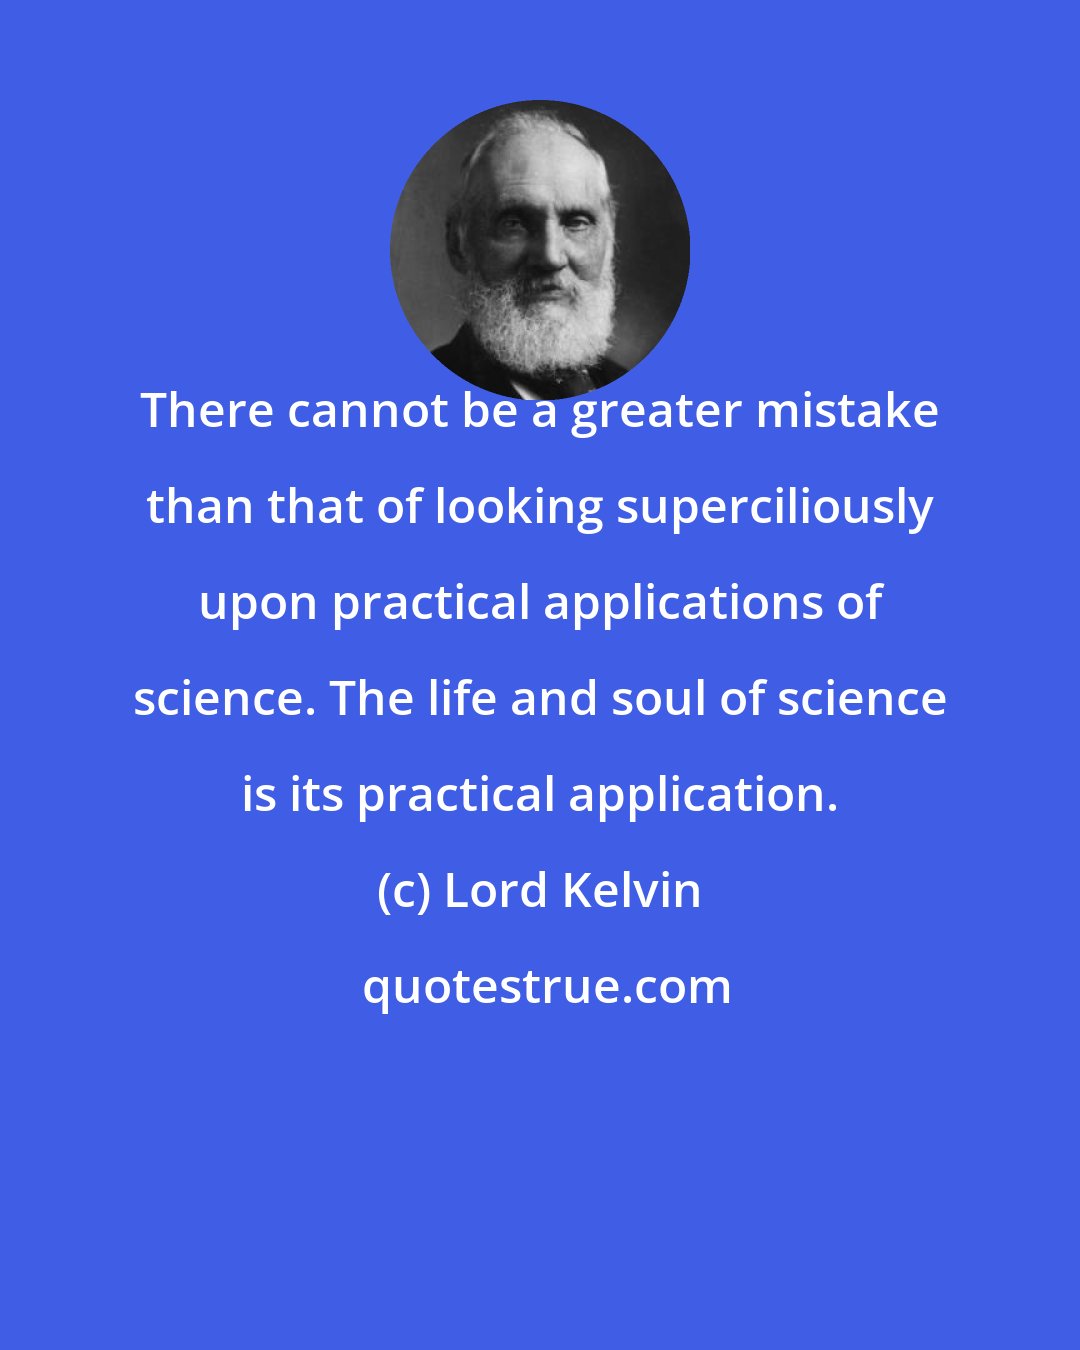 Lord Kelvin: There cannot be a greater mistake than that of looking superciliously upon practical applications of science. The life and soul of science is its practical application.